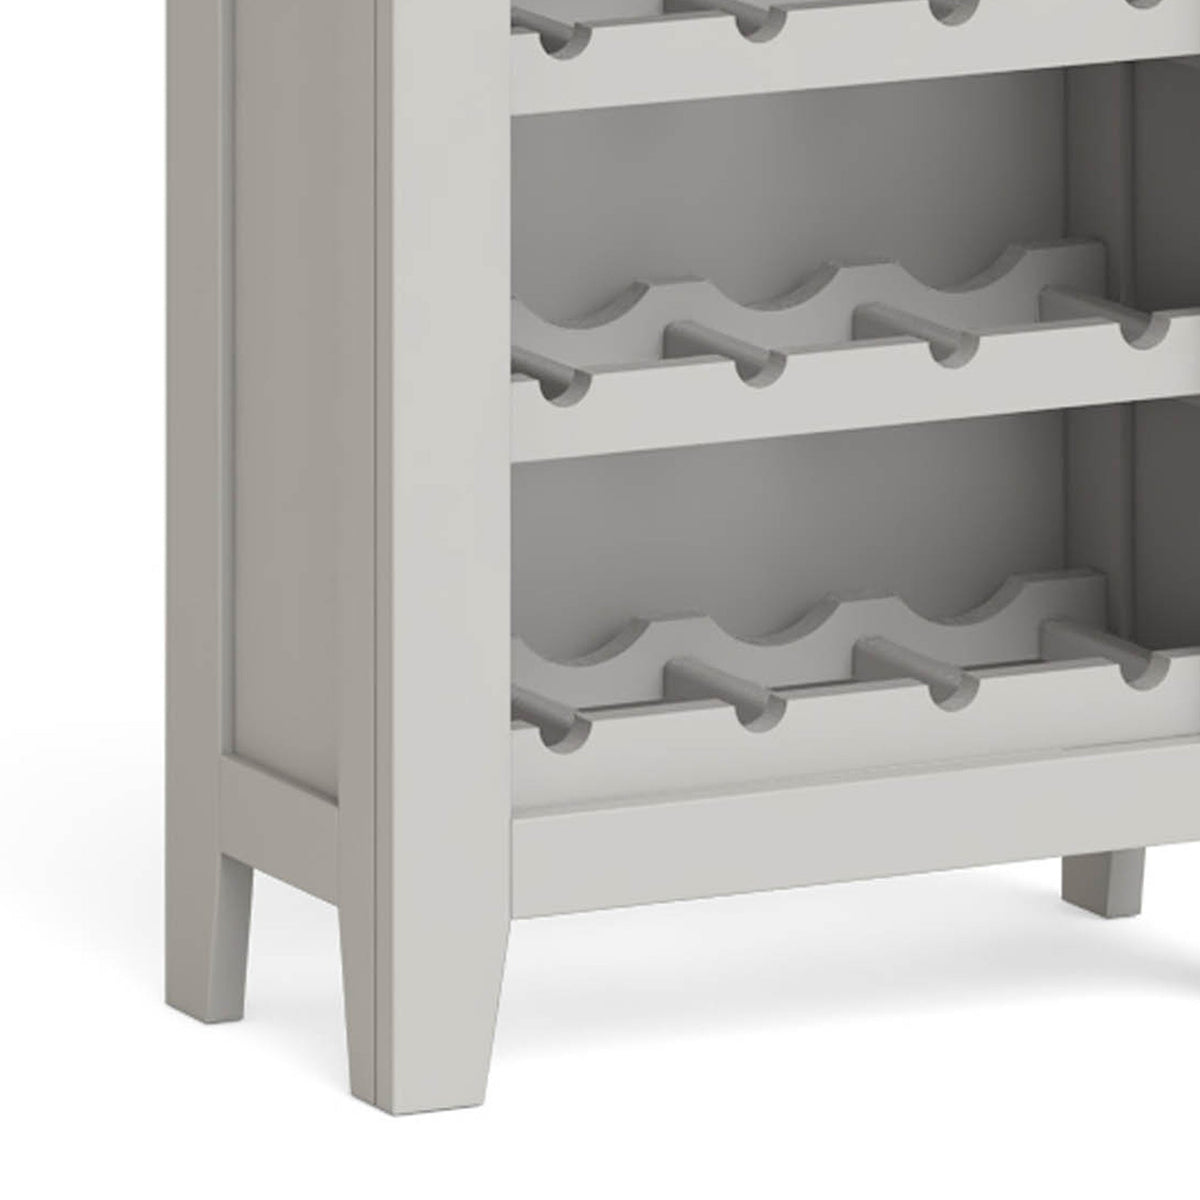 Lundy Grey Wine Rack Cabinet - Close Up of Bottle Holders